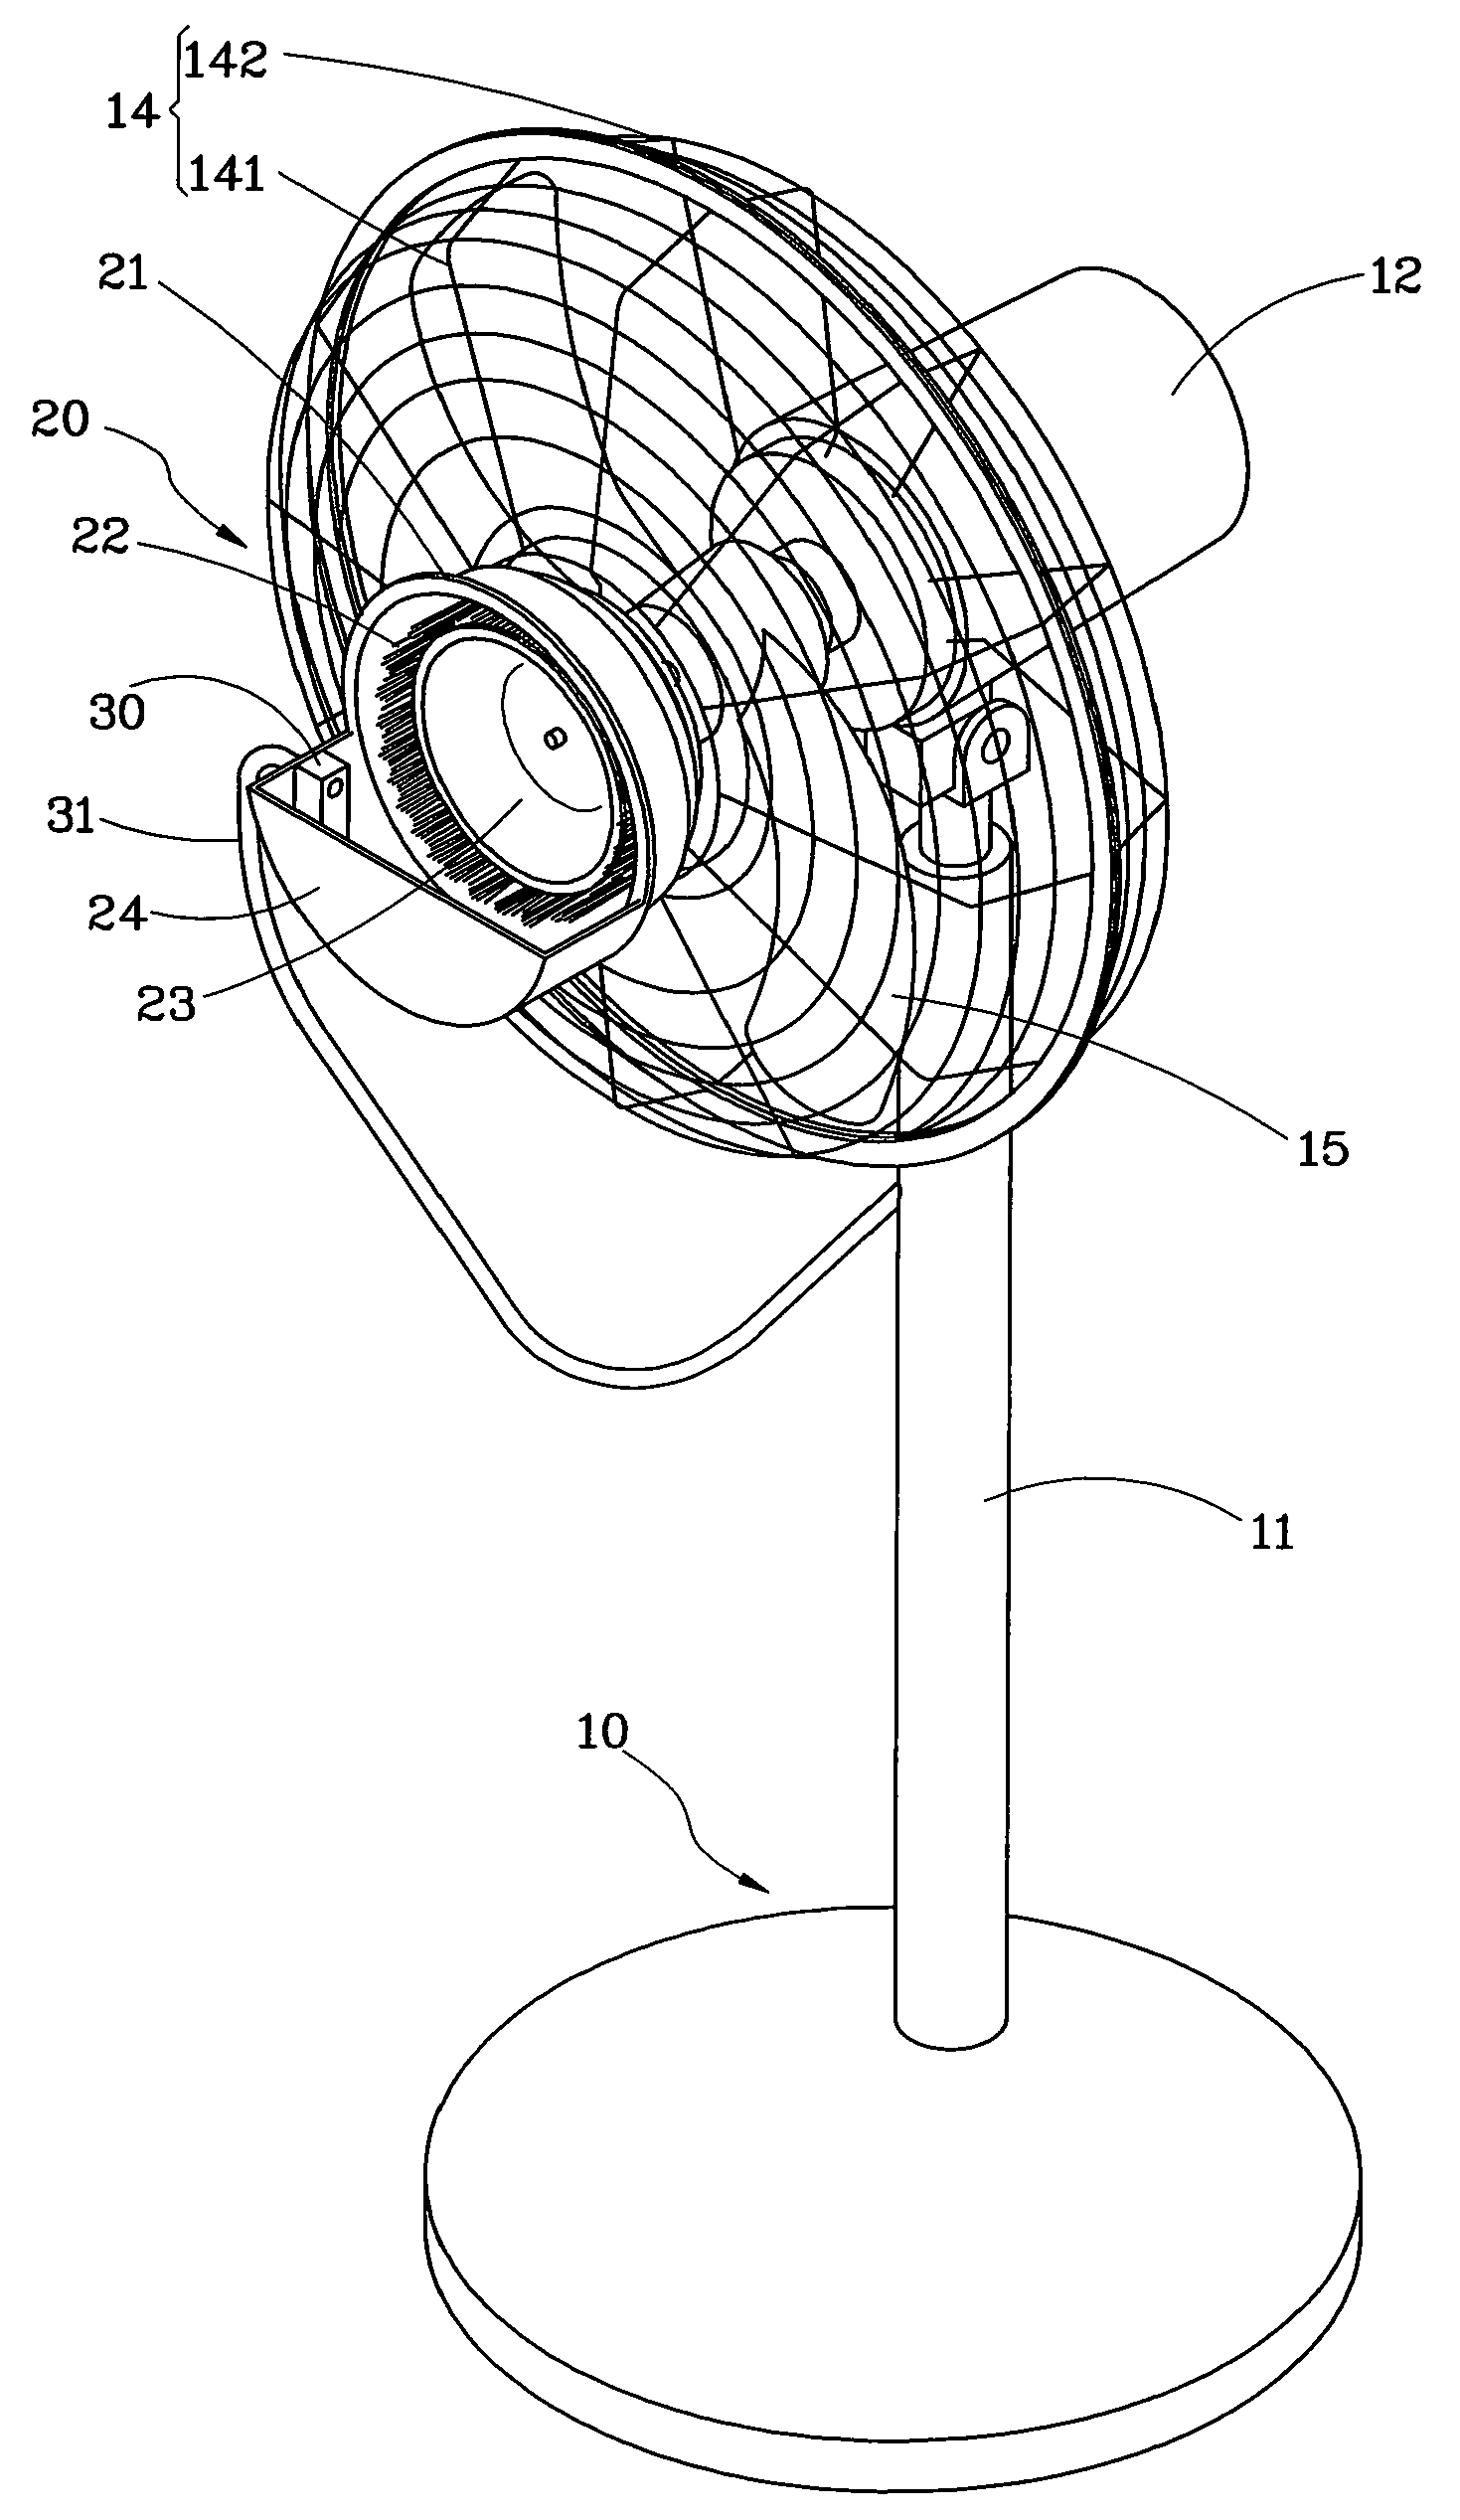 Electric fan with water atomizer